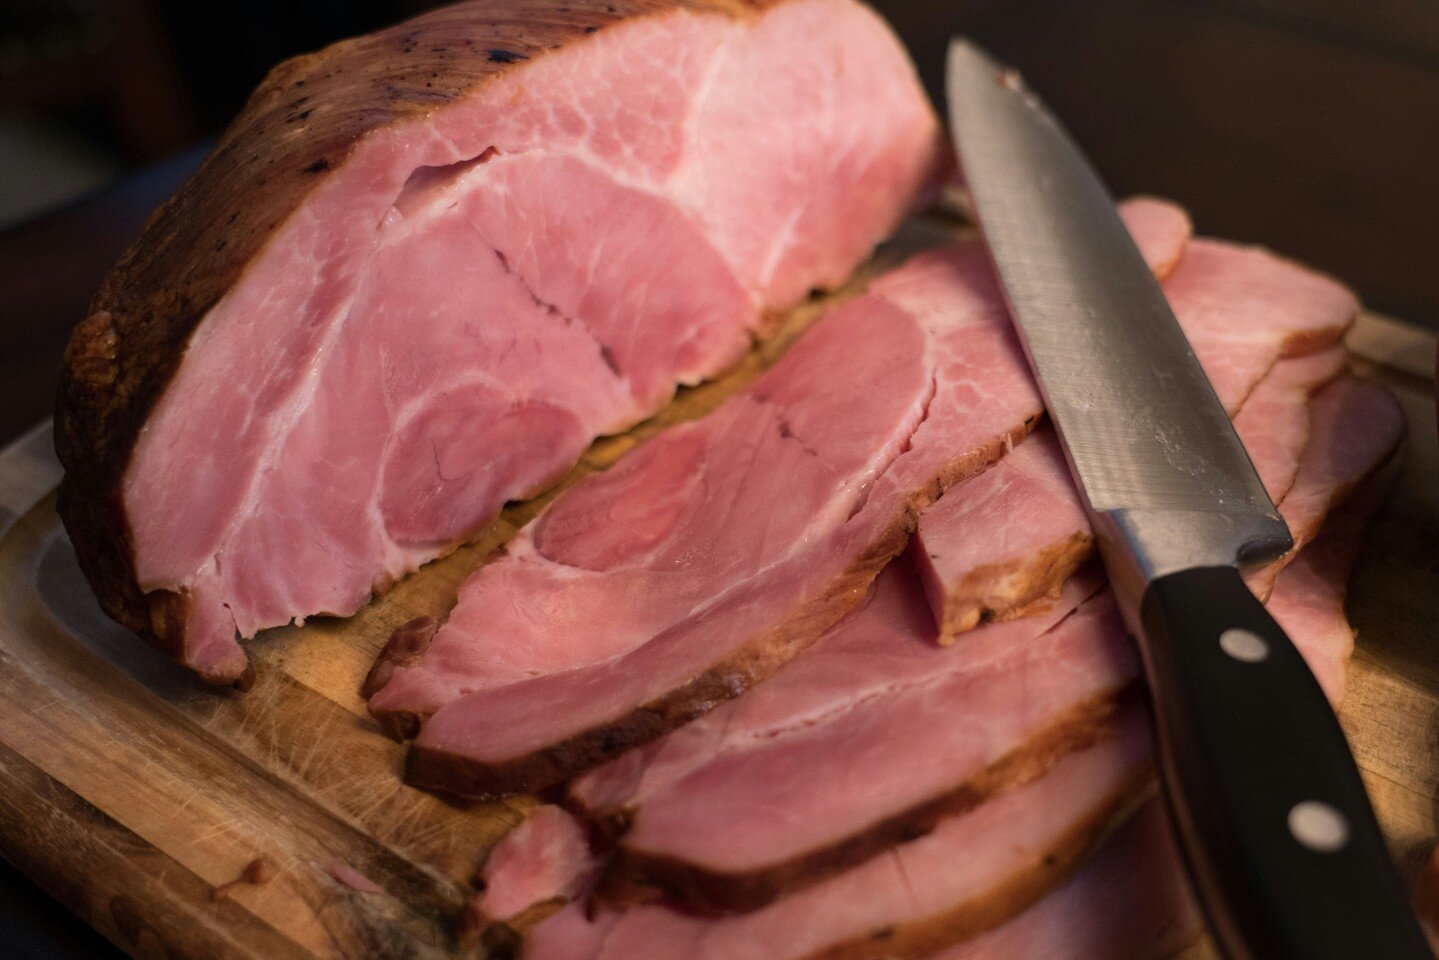 &quot;🐰🌷 Elevate your Easter feast with Tuckaway's delicious Easter hams! 🍖 Made with care from our farm to your table, these succulent bone in hickory smoked hams are the perfect centerpiece for your holiday spread. Order yours today and make thi